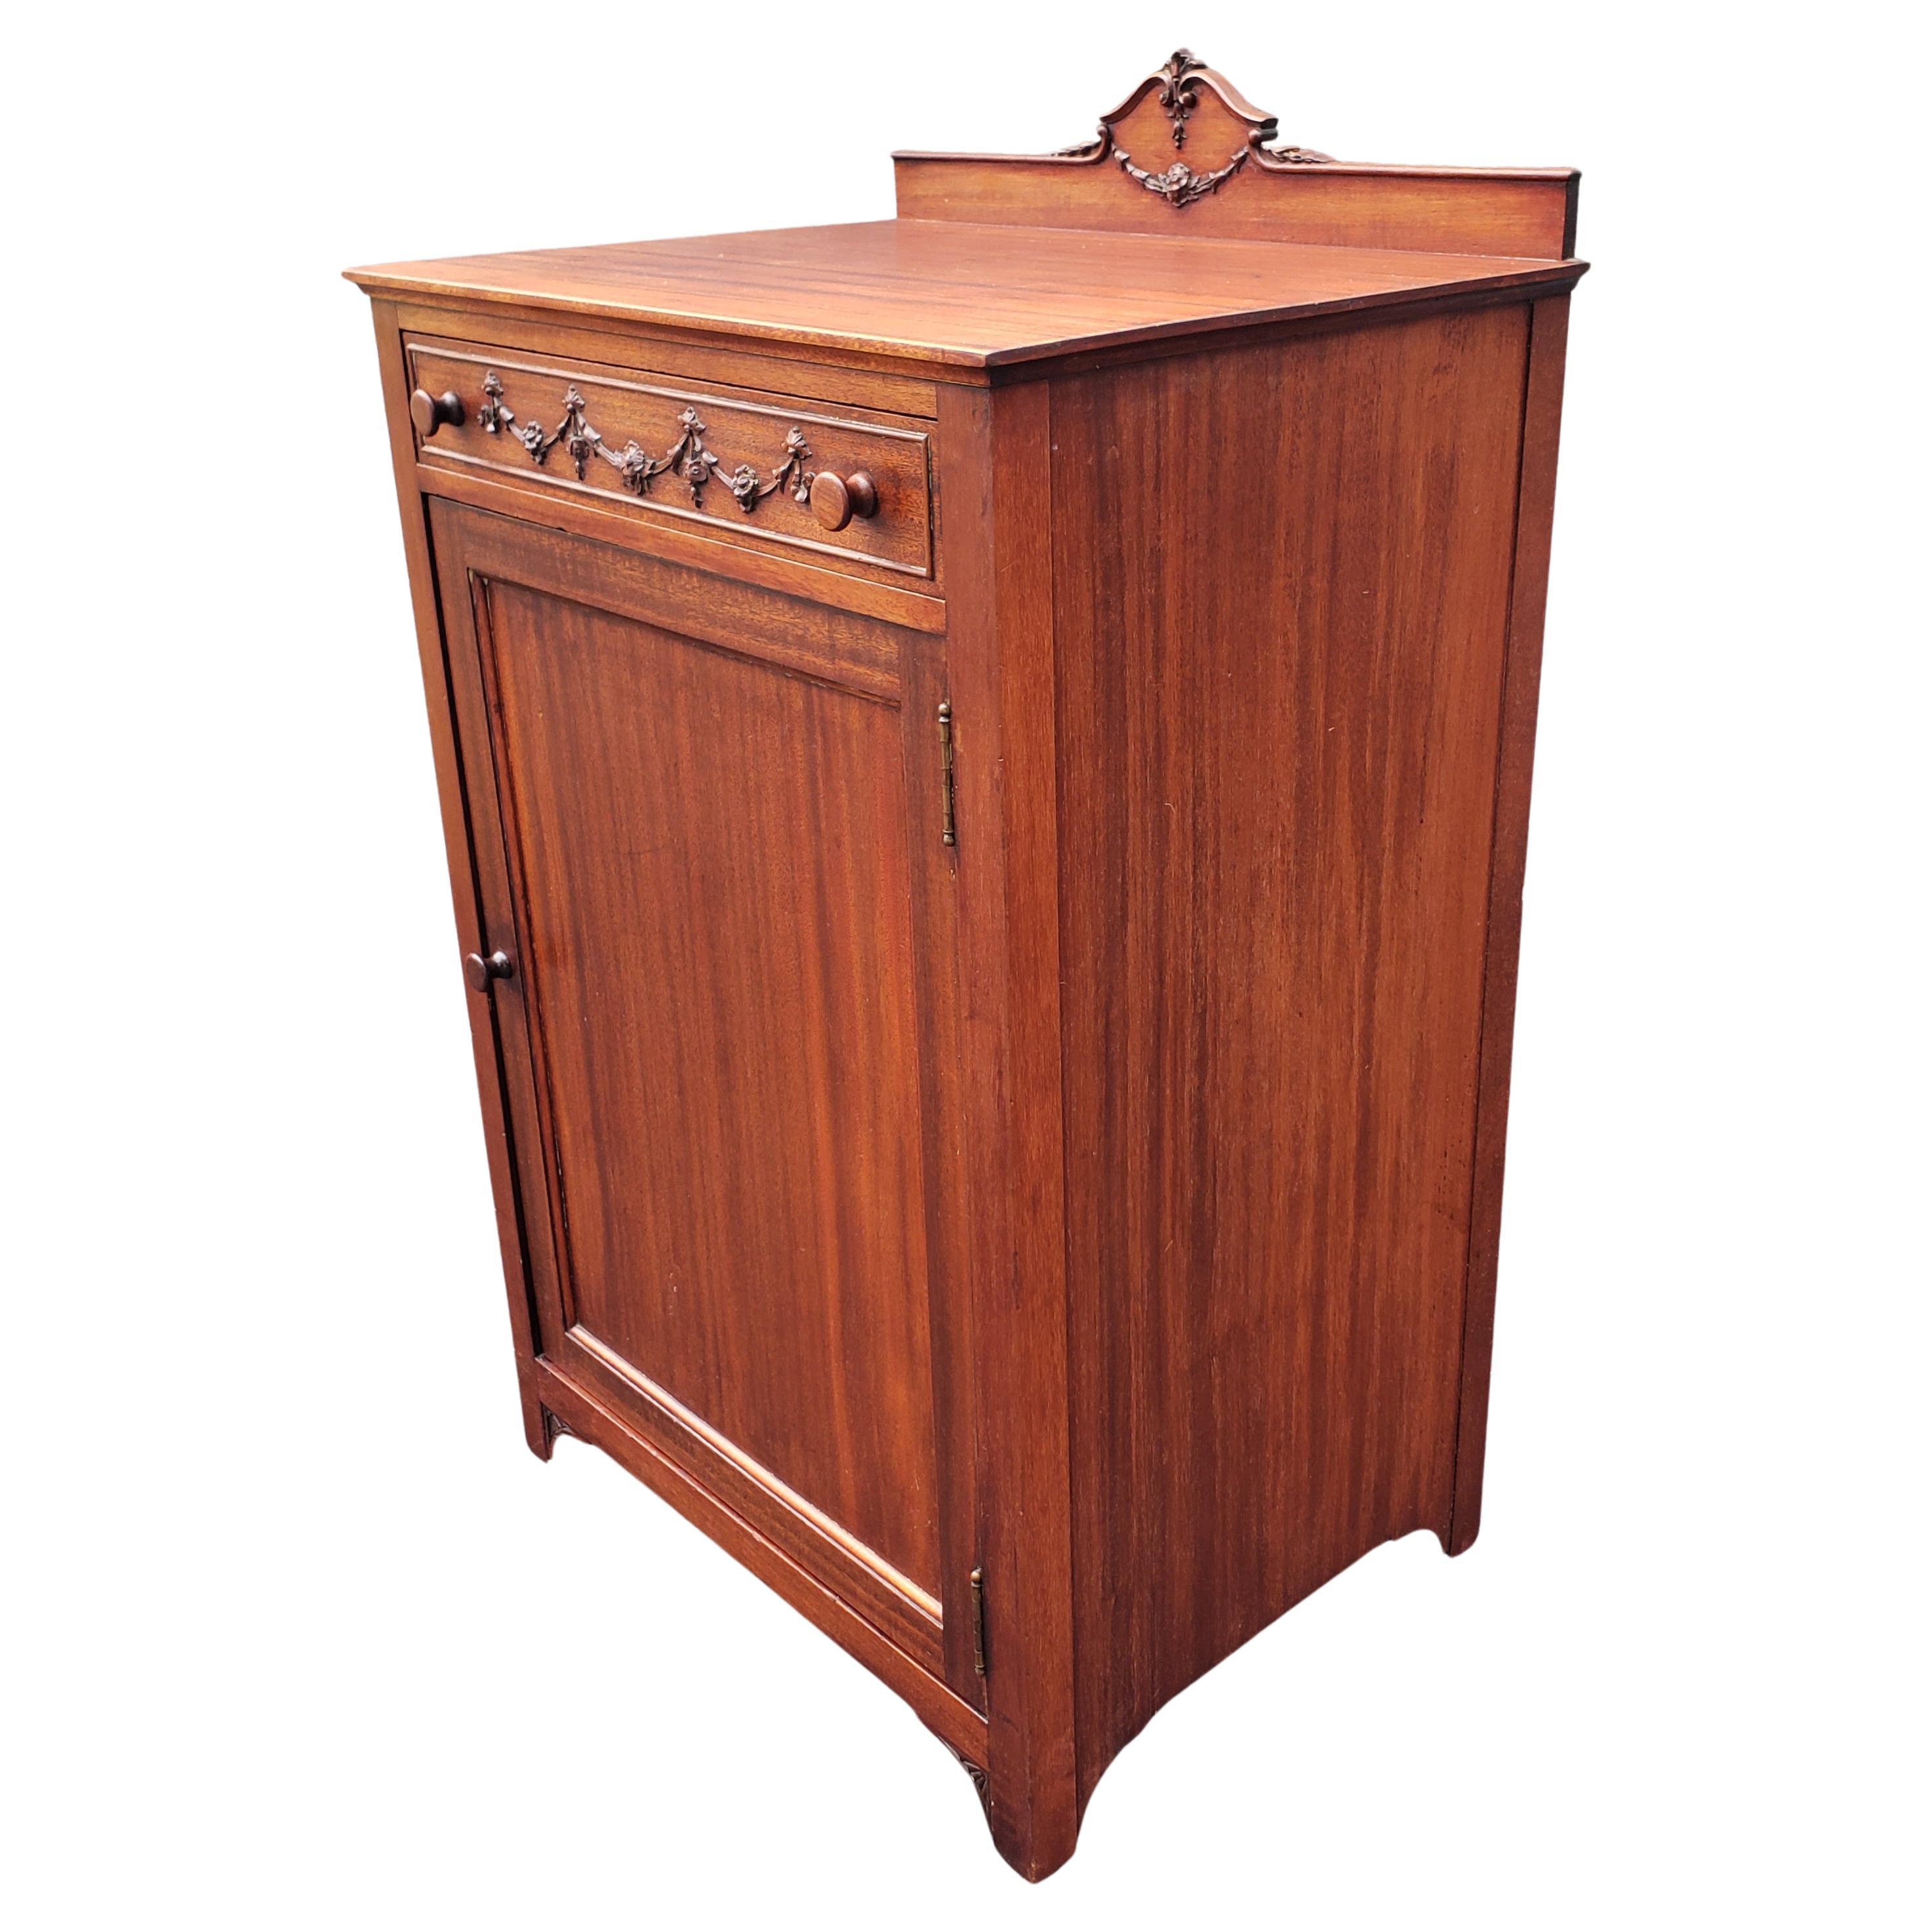 19th Century Robert J. Horner and Co. Solid Carved Mahogany Sheet Music Cabinet For Sale 3